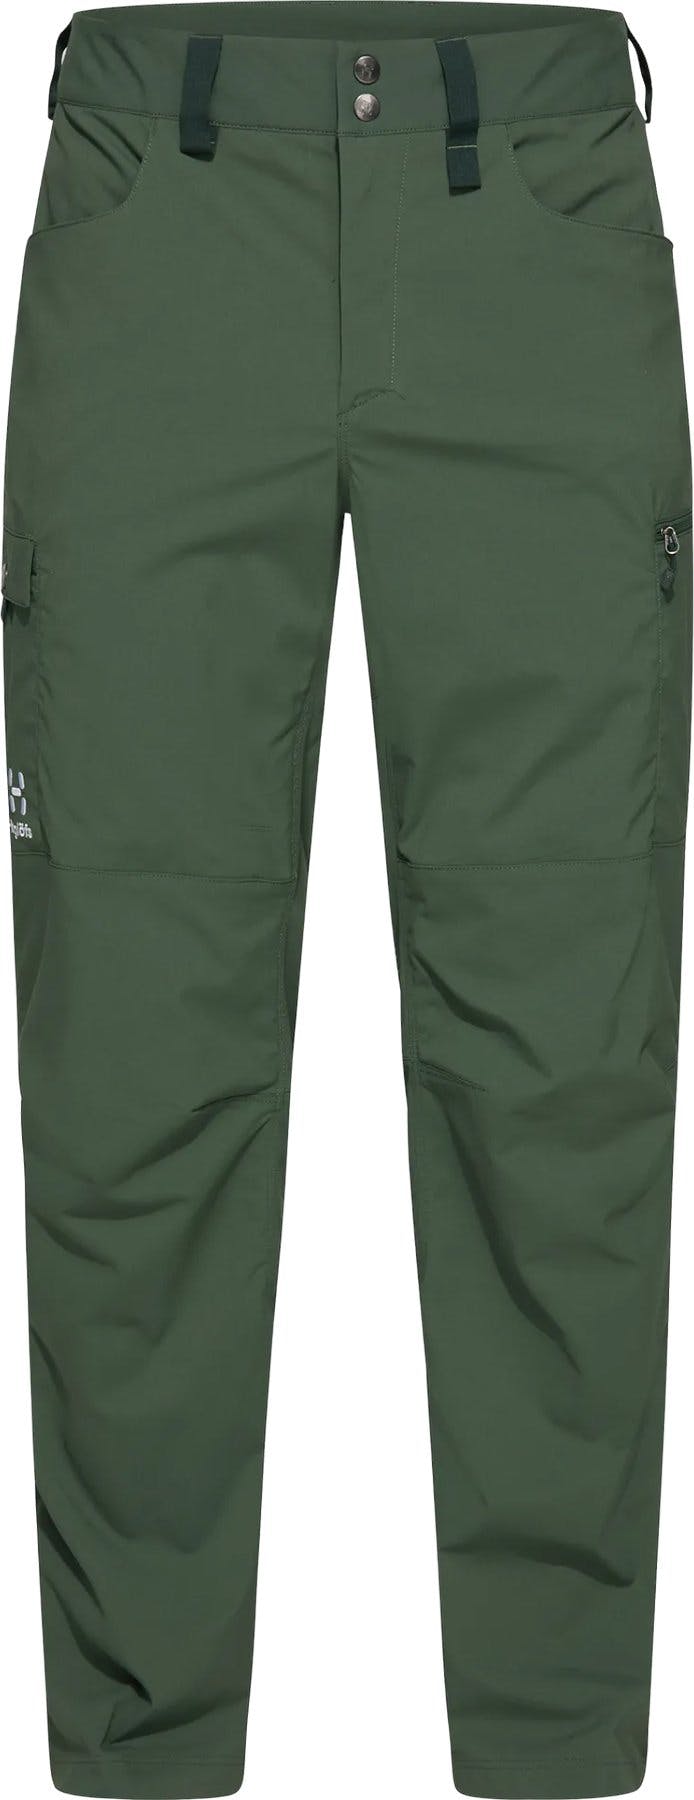 Product image for Hiking Pant - Men's